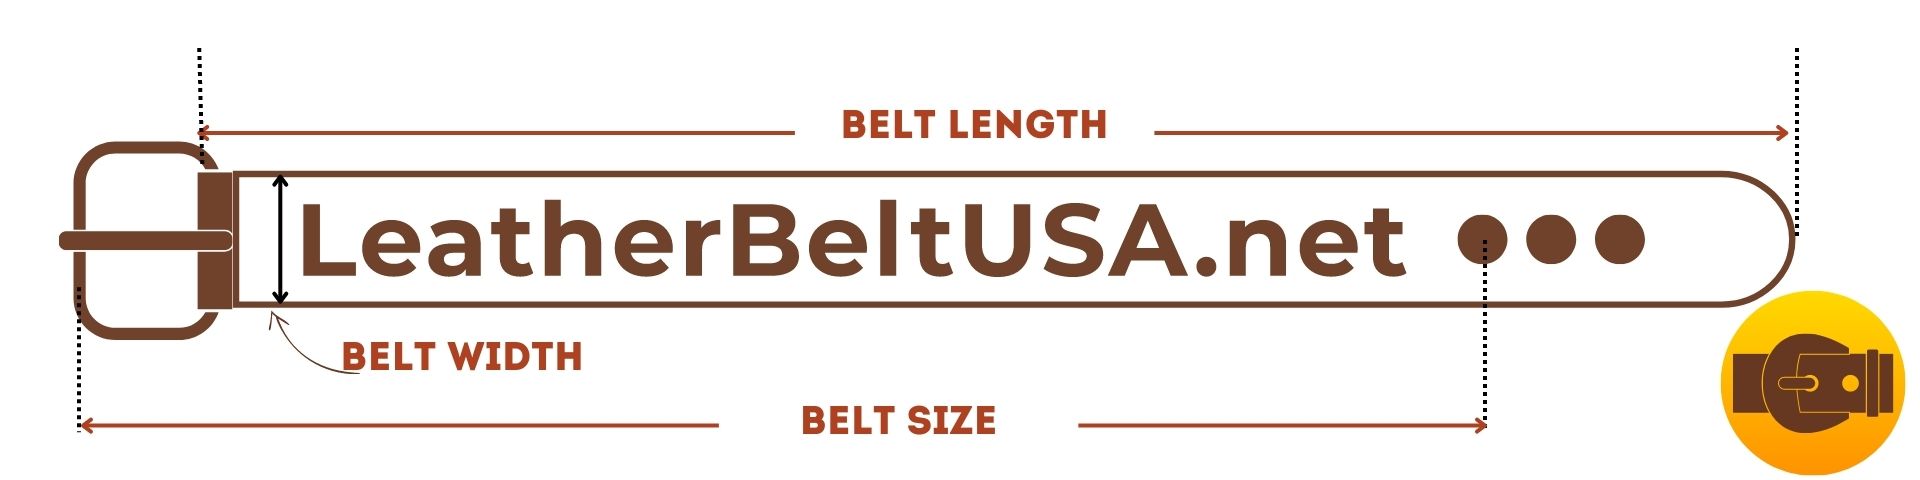 Belt dimensions, how to measure: belt width and length.